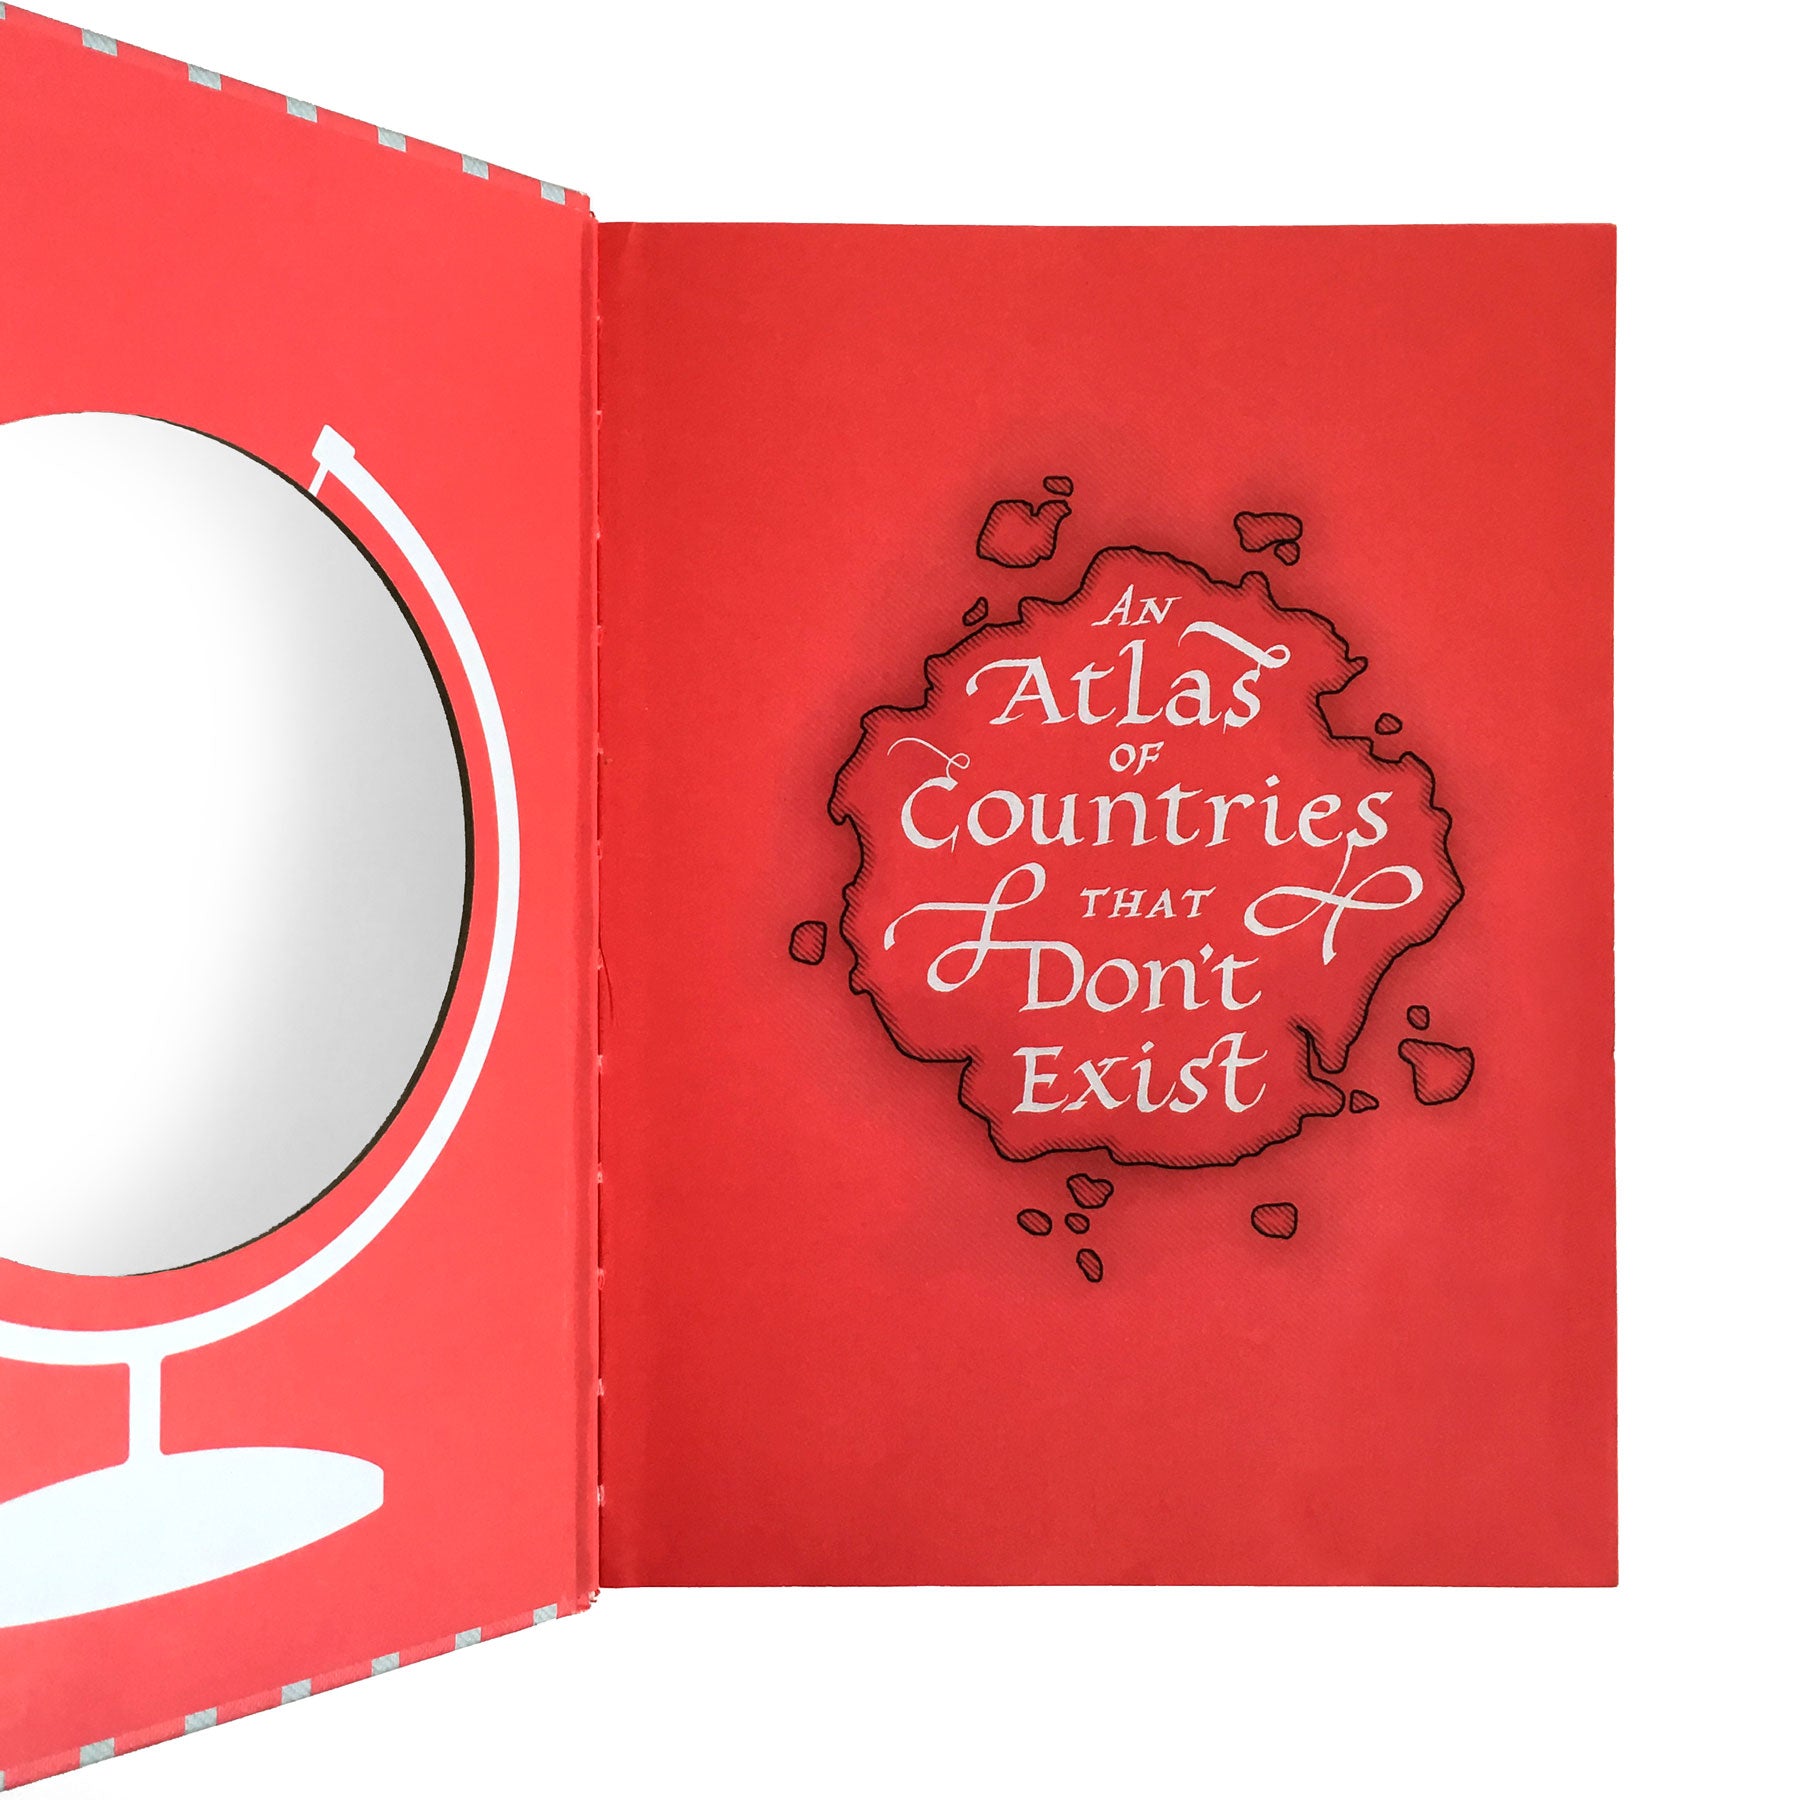 An Atlas of Countries that Don't Exist